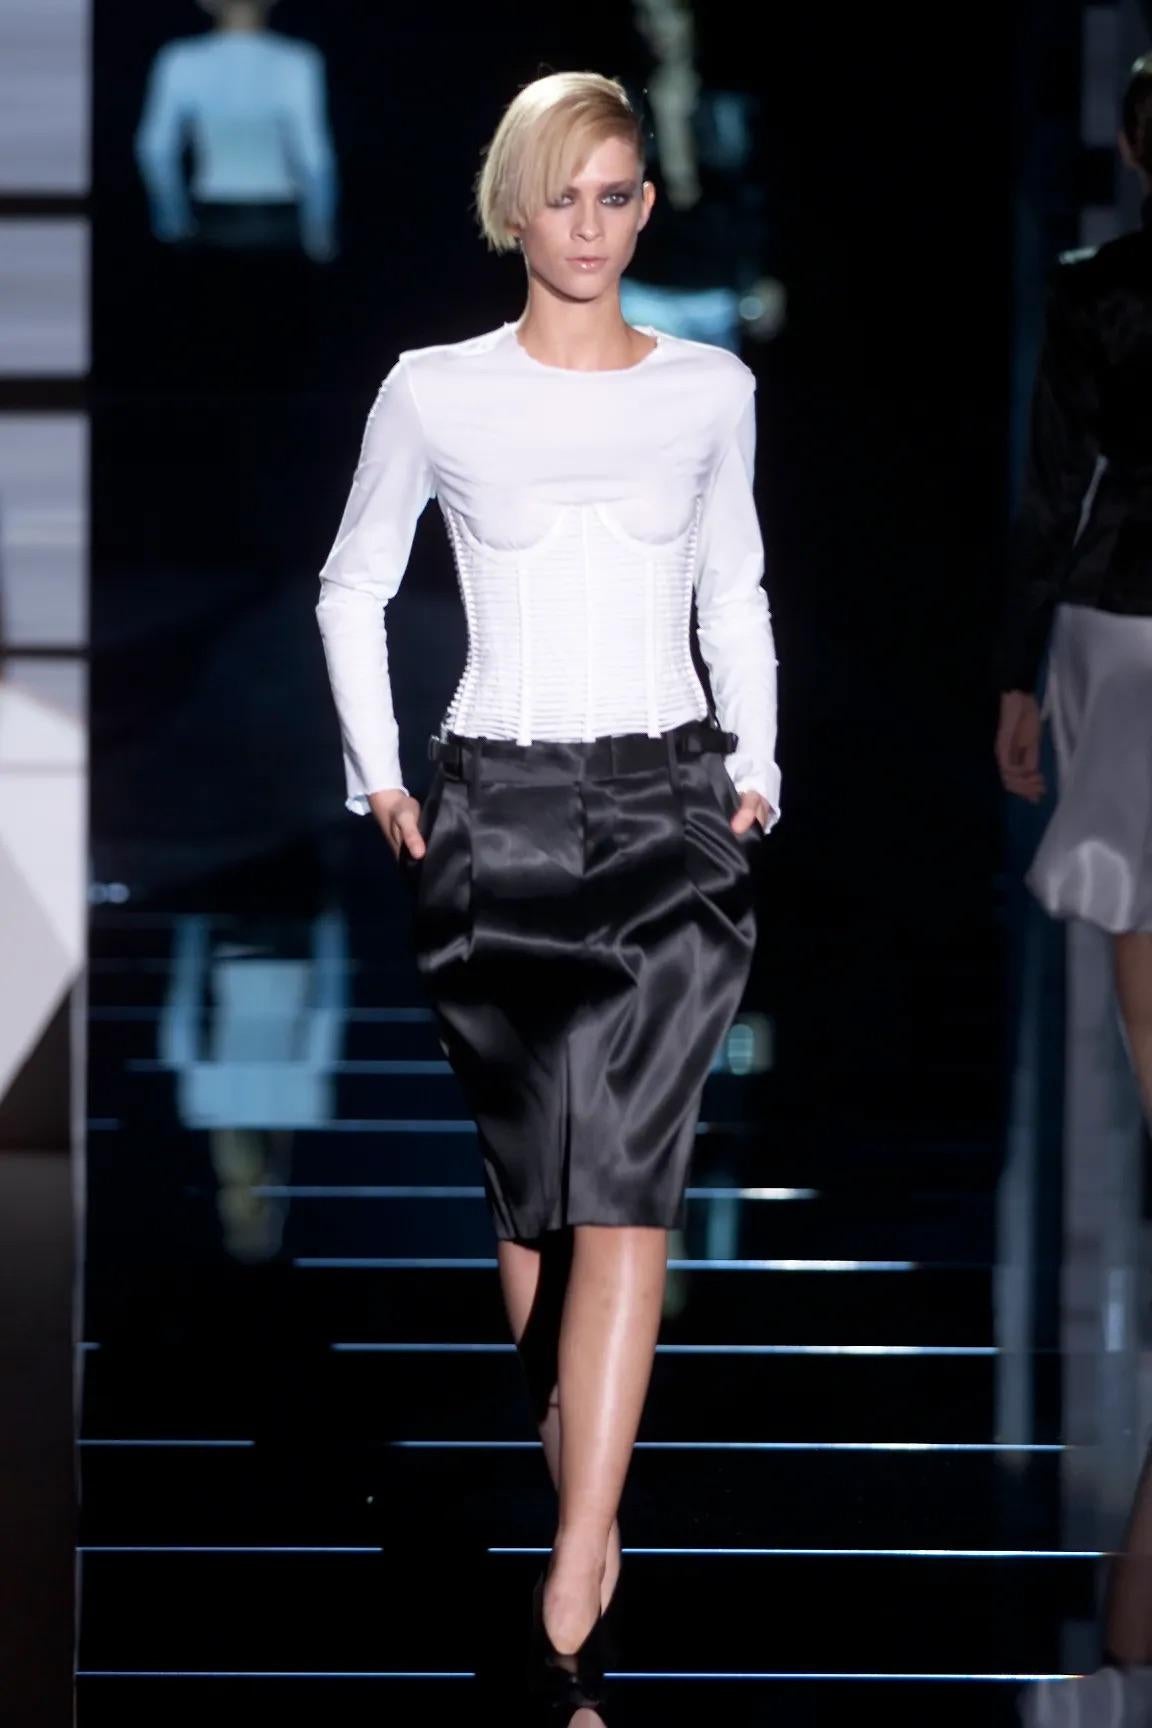 Presenting a chic black silk satin skirt by Gucci, designed by Tom Ford from the Spring/Summer 2001 collection. This pencil skirt made its debut on the season's runway as part of look 16, worn by model An Oost. Constructed entirely of silk satin,